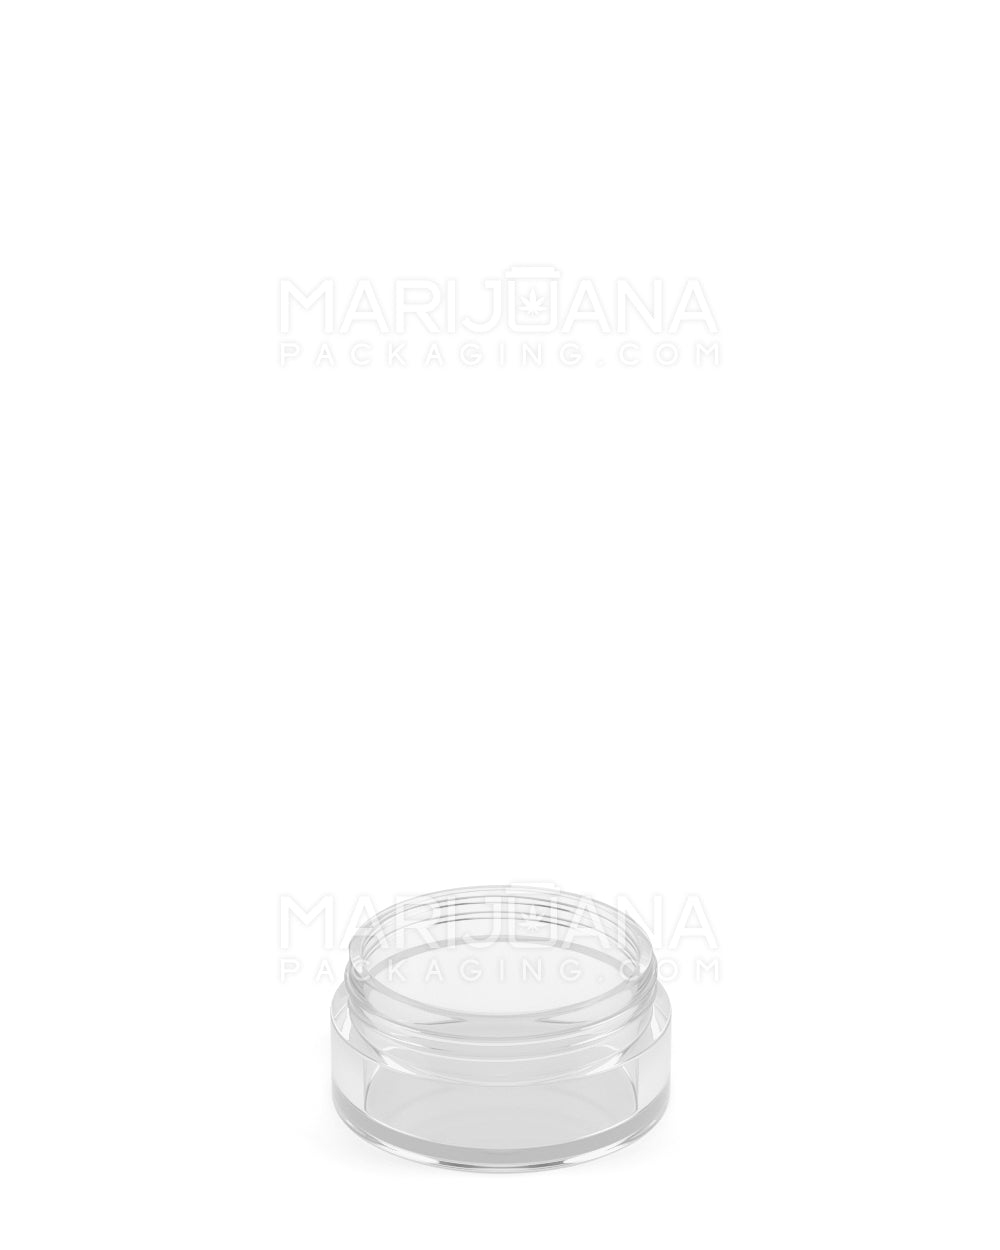 Clear Concentrate Containers w/ Screw Top Cap | 5mL - Plastic - 250 Count - 5